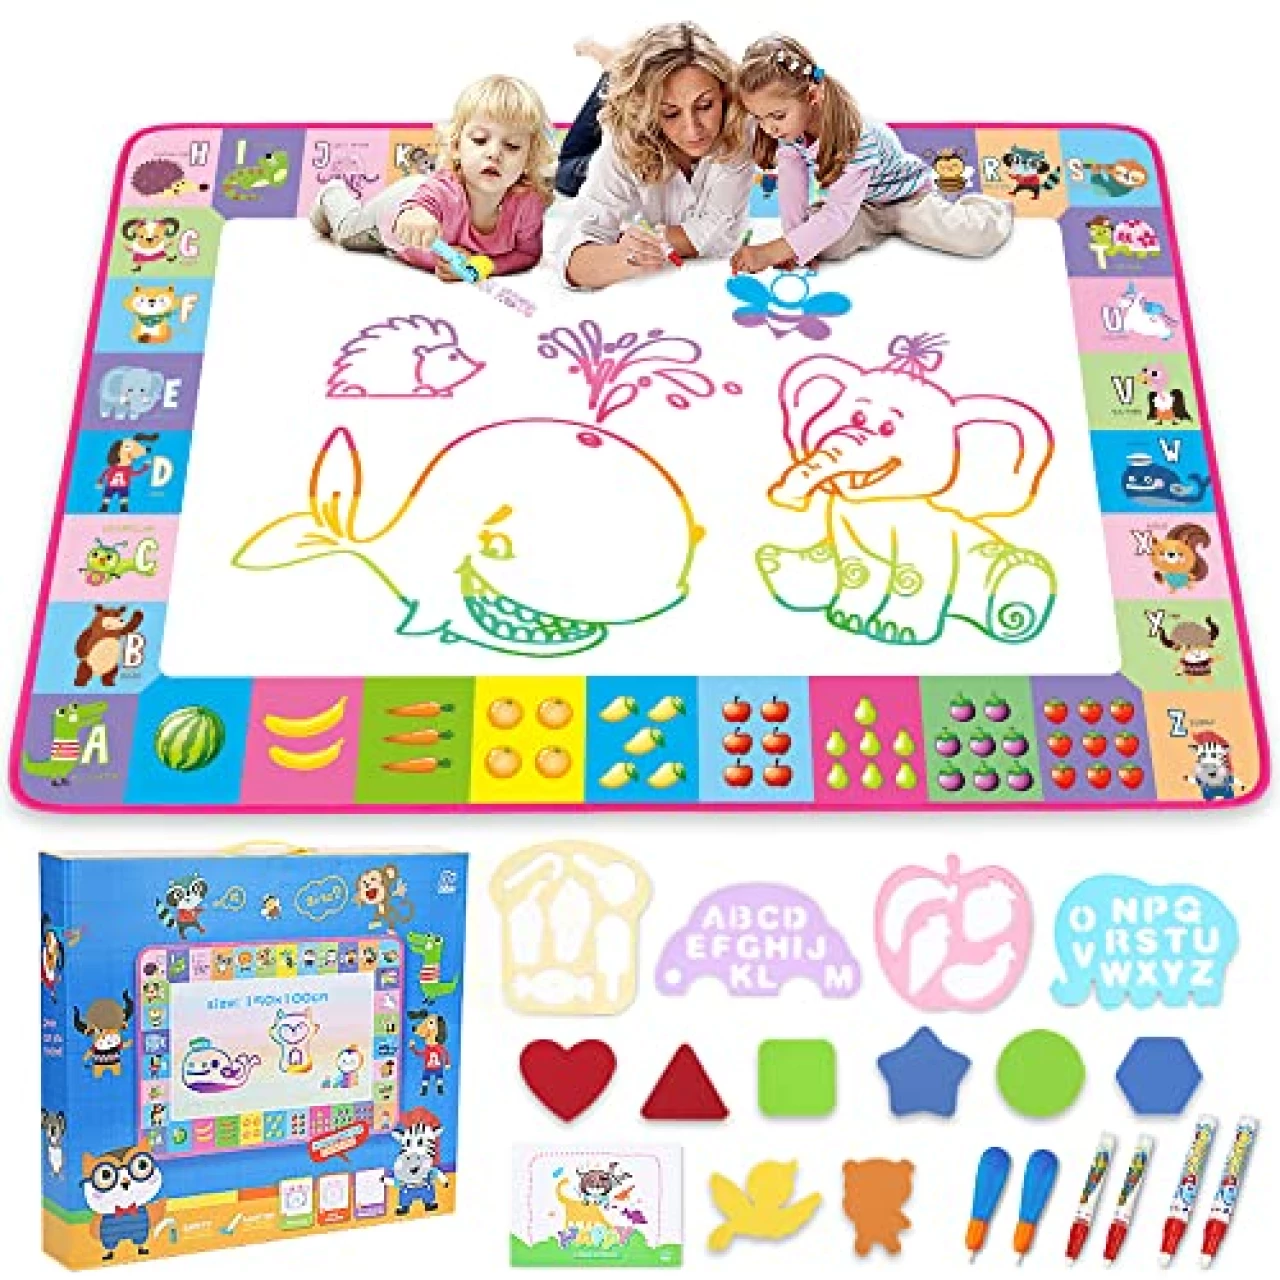 Water Doodle Mat - Kids Painting Writing Doodle Toy Board - Color Doodle Drawing Mat